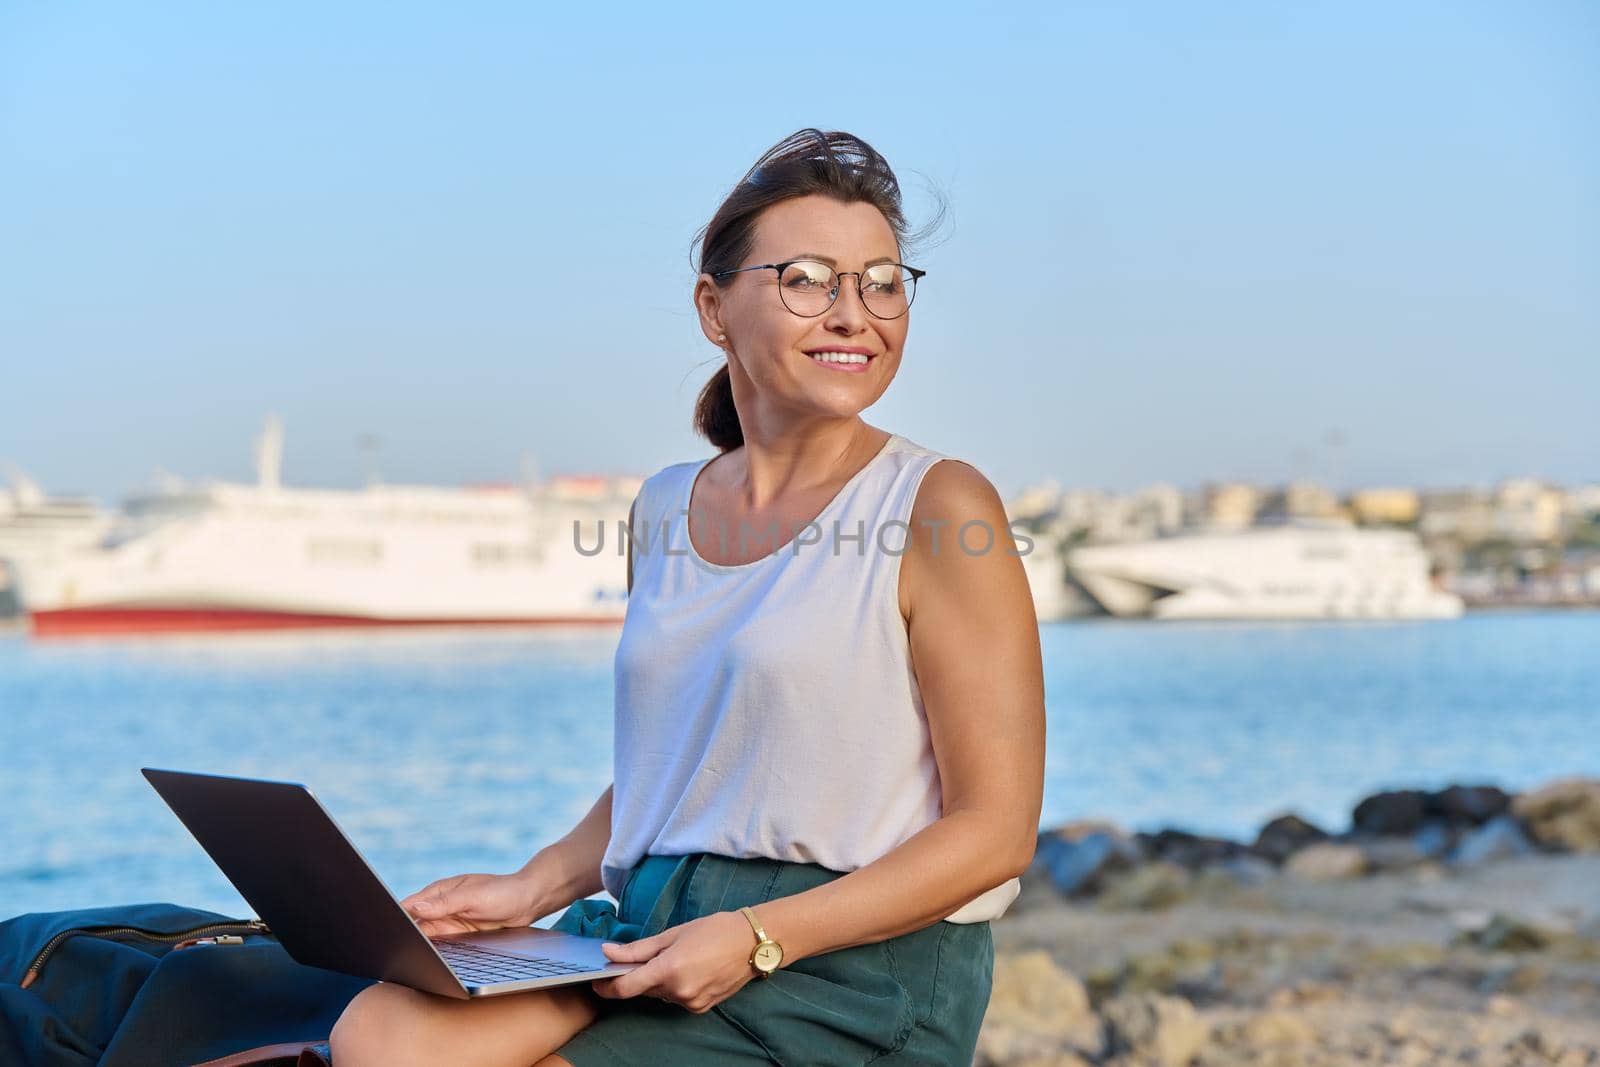 Middle-aged woman tourist with a backpack, traveling on the sea, in the seaport on a bench using a laptop. Technology, vacations, tourism, leisure, active lifestyle, mature people concept